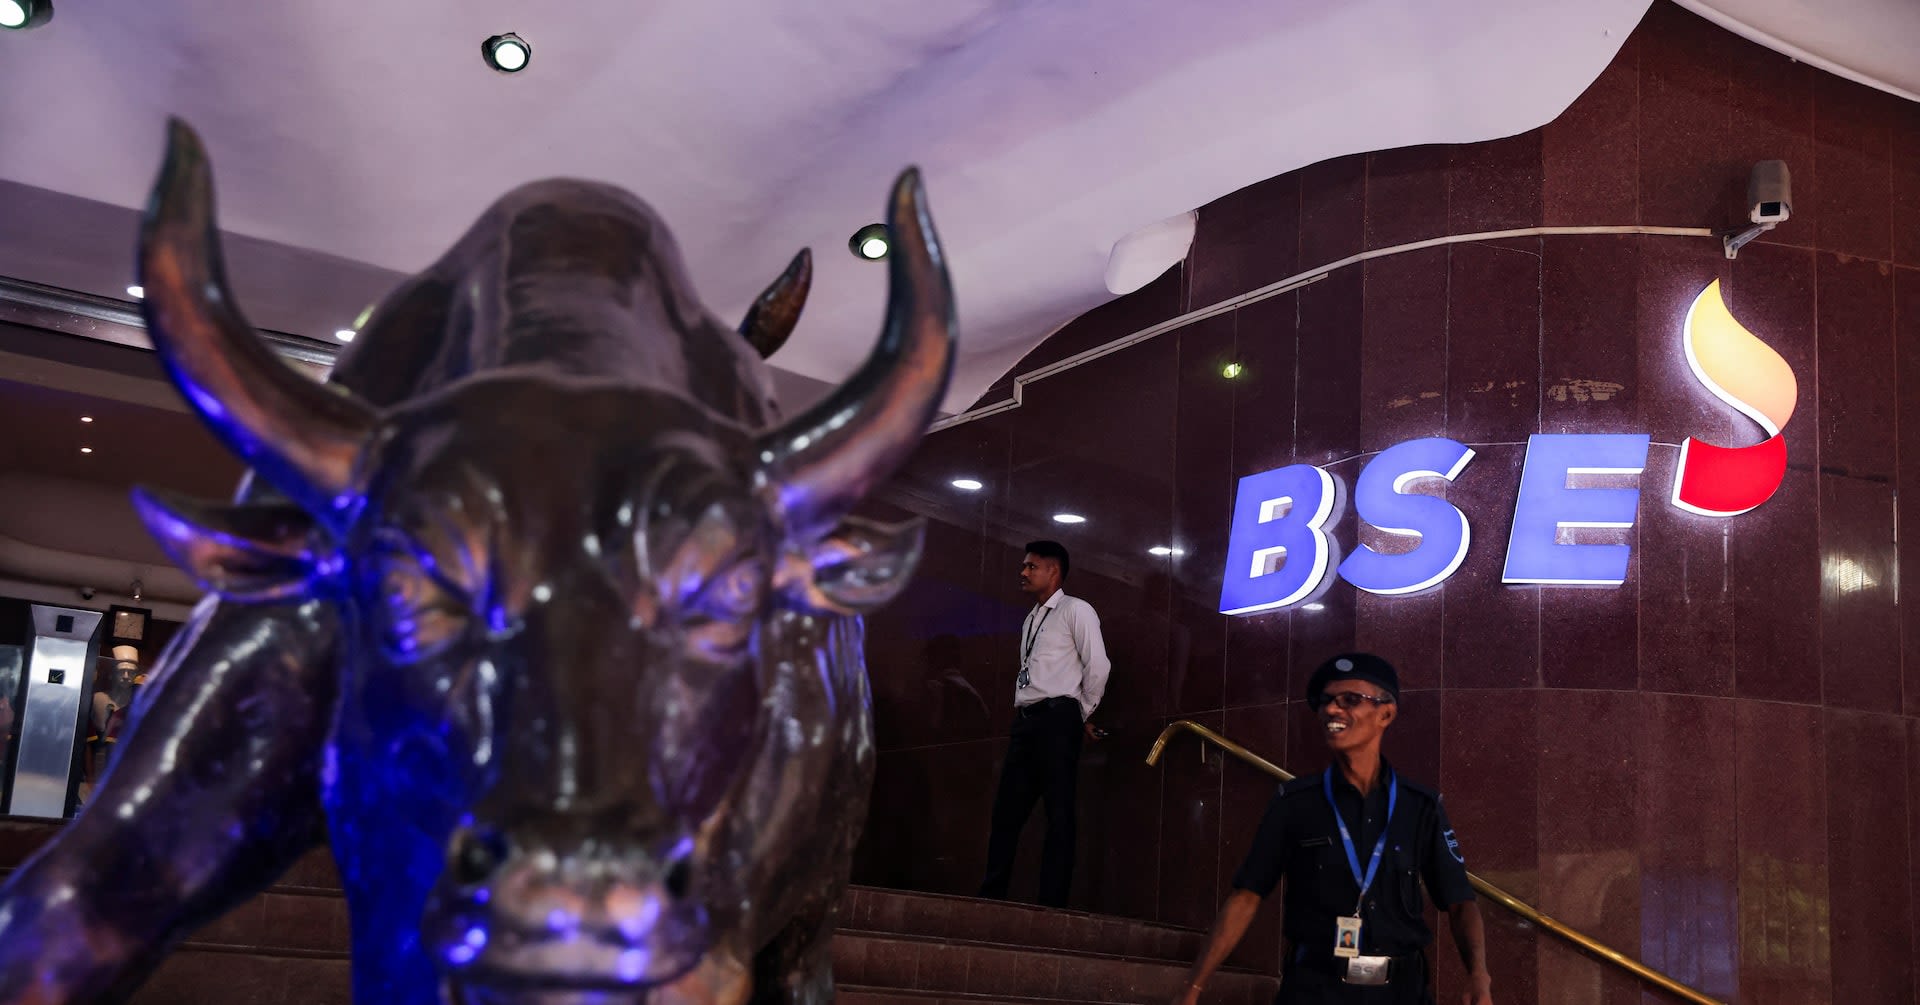 Indian shares likely to open higher after Fed's status quo, oil price fall